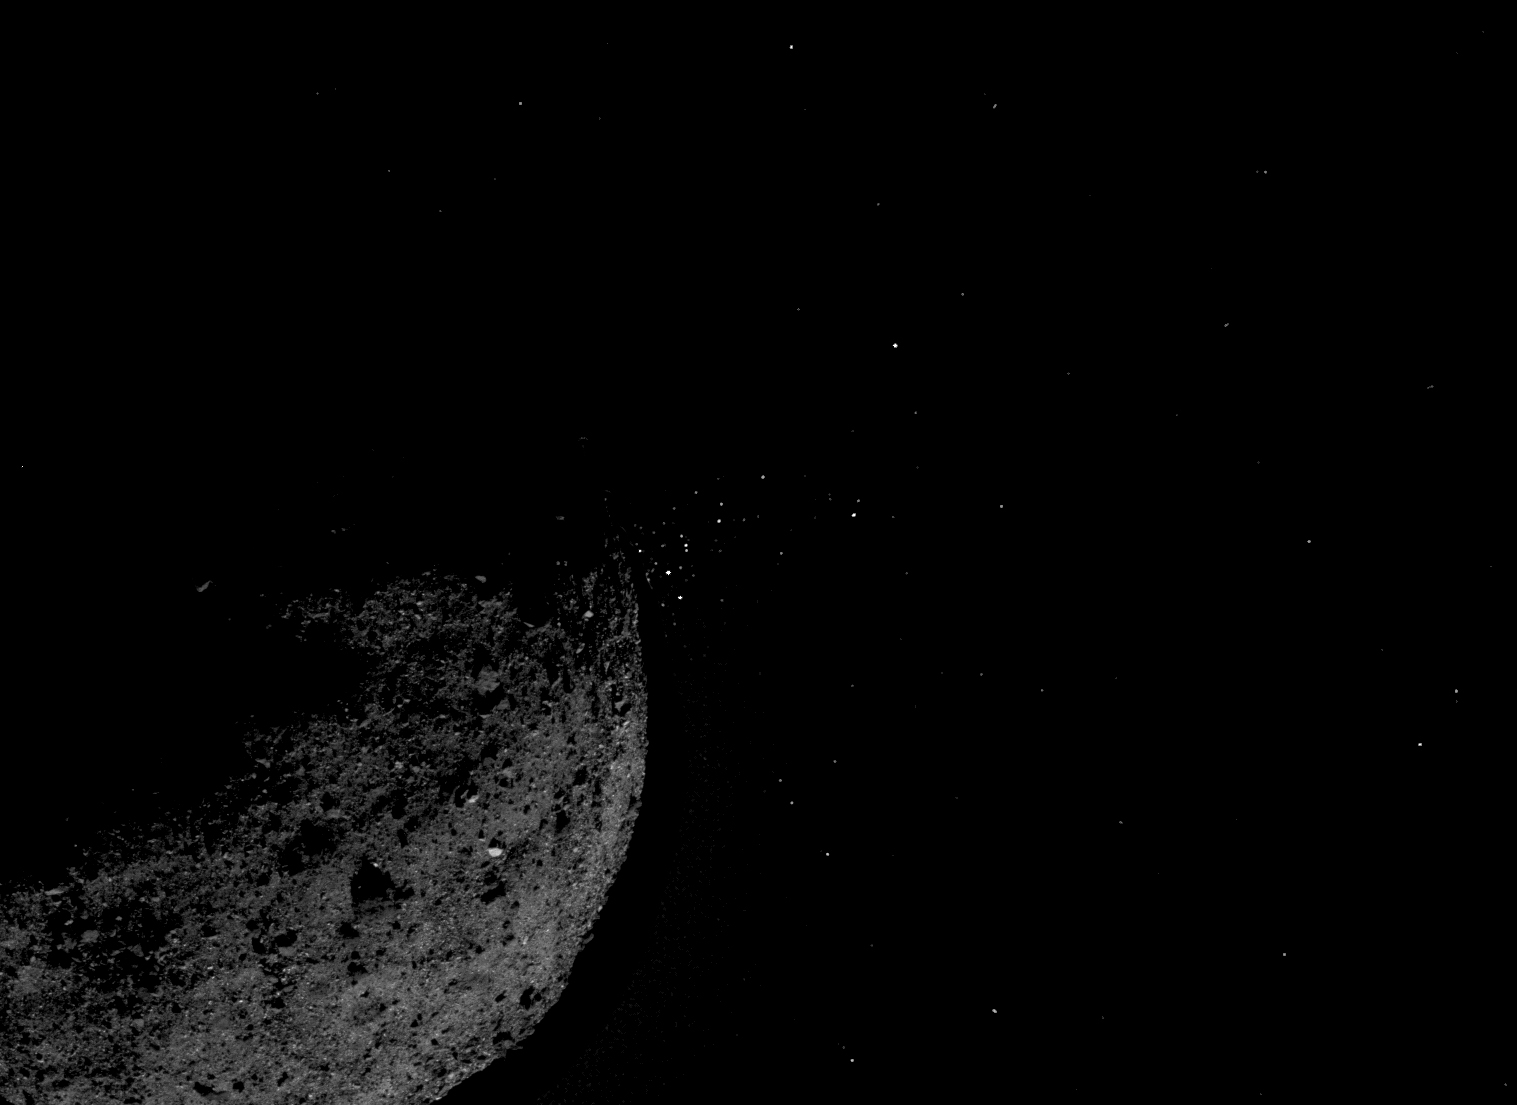 Asteroid Bennu ejecting particles from its surface on Jan. 19, created by combining two images from NASA’s OSIRIS-REx spacecraft